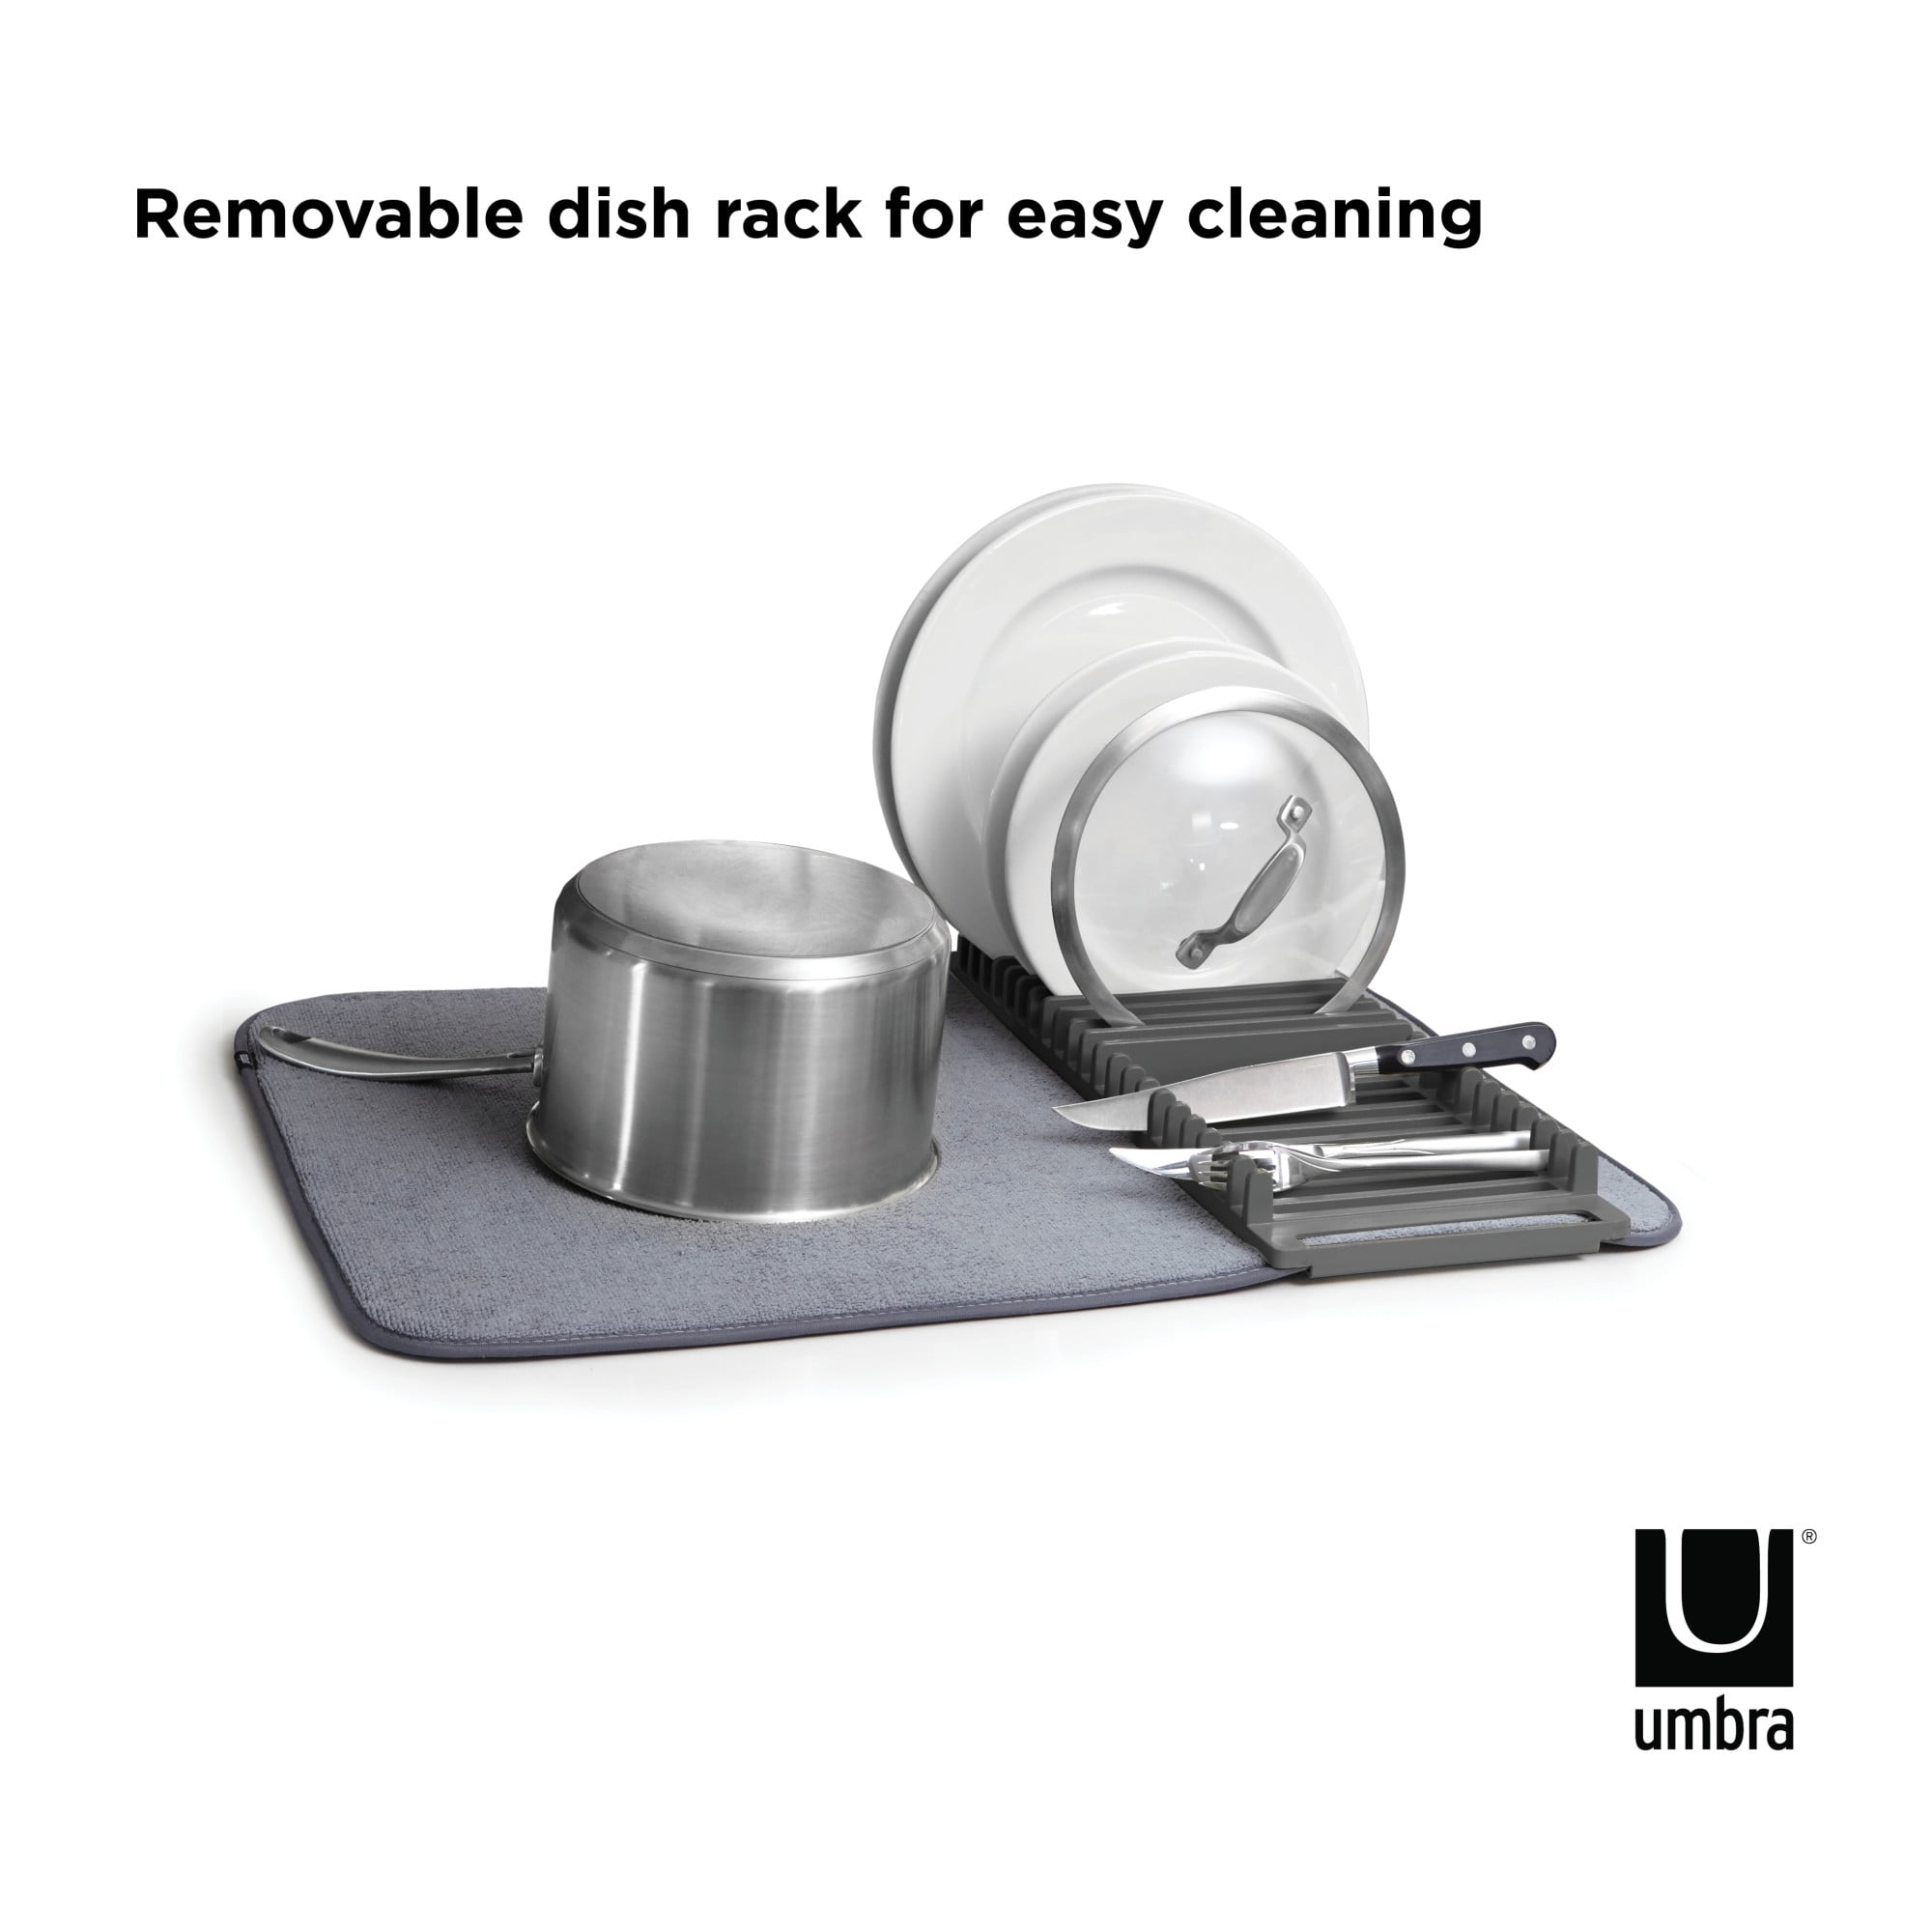 Umbra Udry Dish Drying Rack And Microfiber Dish Drying Mat - Space-Saving  Lightweight Design Folds Up For Easy Storage, 24 X 18 Inches 